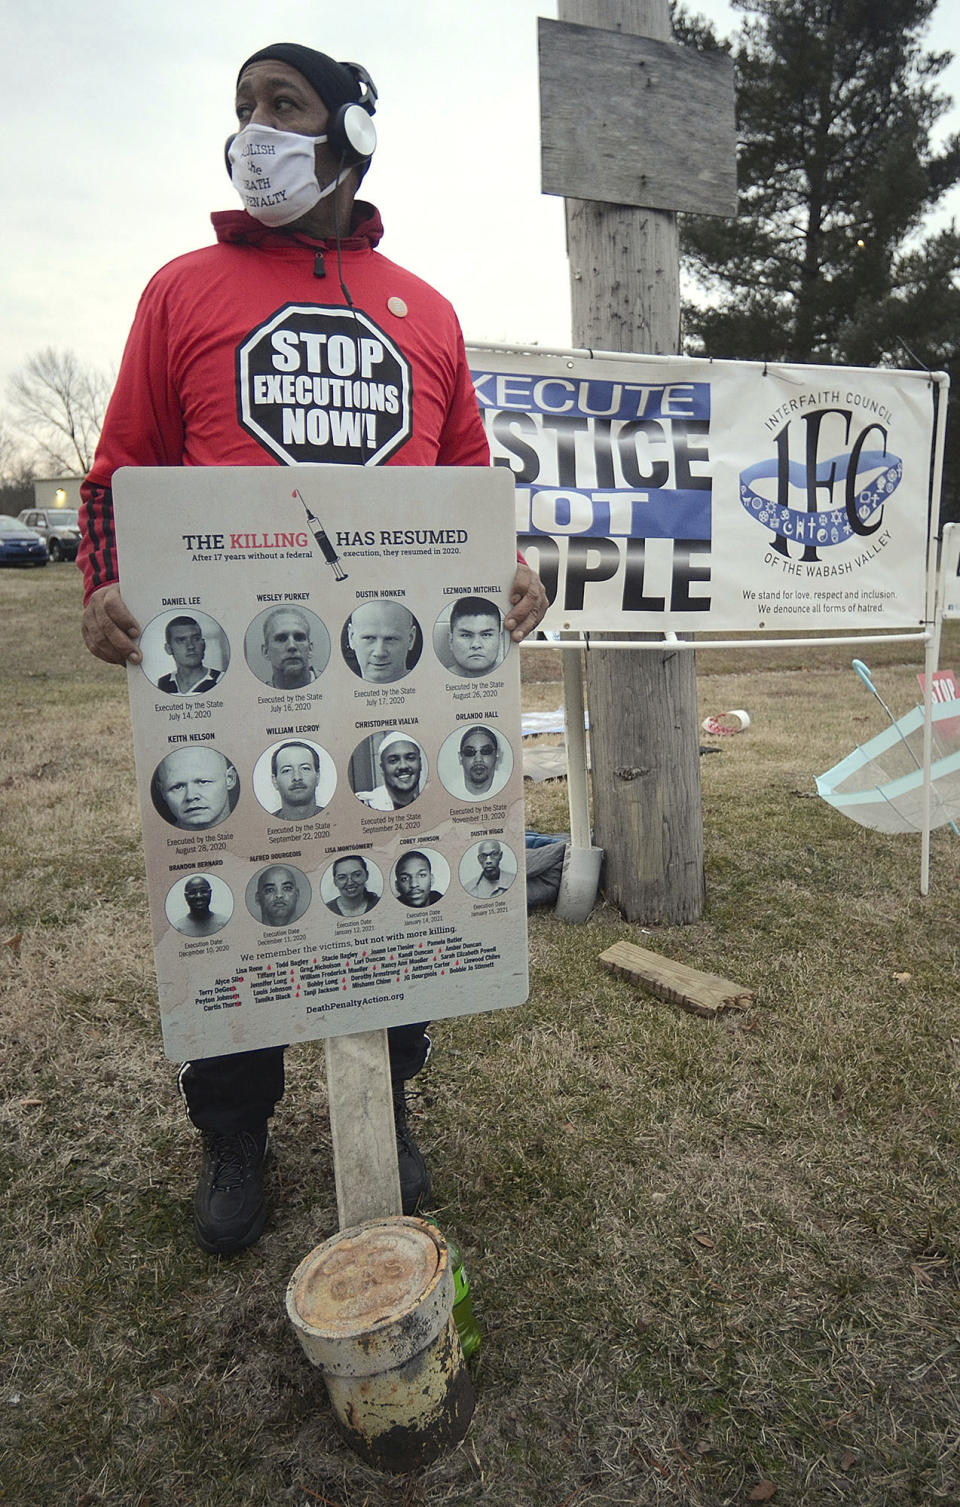 At a protest of the execution of Corey Johnson, Thursday, Jan. 14, 2021, near the Federal Correctional Complex in Terre Haute, Ind., Charles Keith, of Canton, Ohio, holds a sign with all of the mugshots of the 10 men and one woman who have been executed by the federal government since July 14, 2020. (Joseph C. Garza/The Tribune-Star via AP)